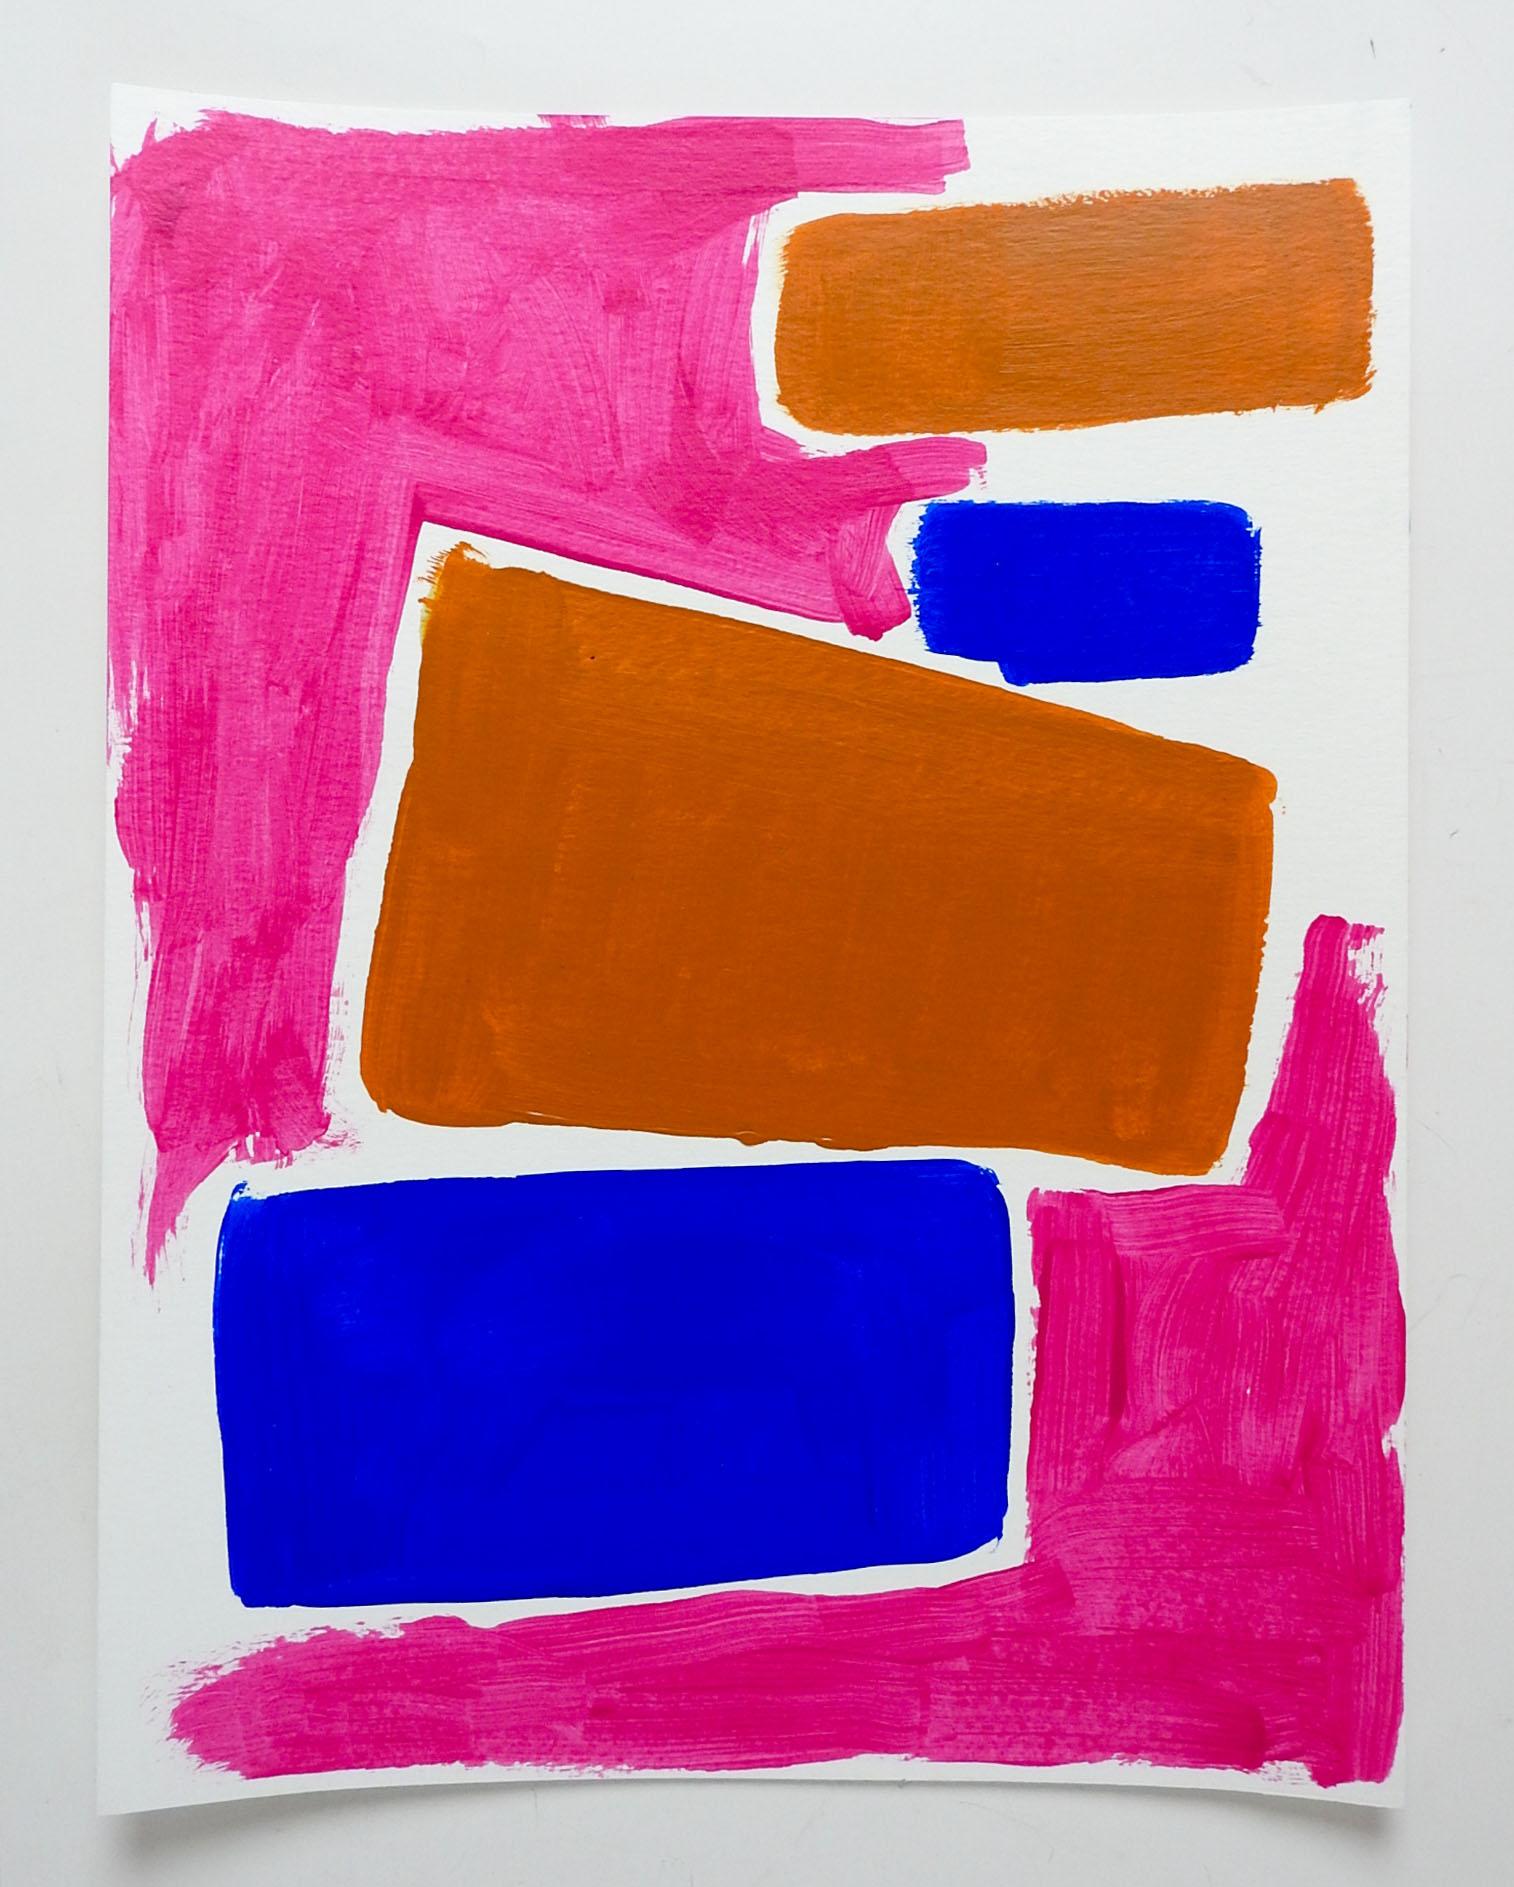 Contemporary 2020 pink, blue and terracotta abstract gouache on paper painting by David Grinnell (21st century) Texas. Signed, dated and titled color block Sketch #12 on verso. Unframed, good condition.